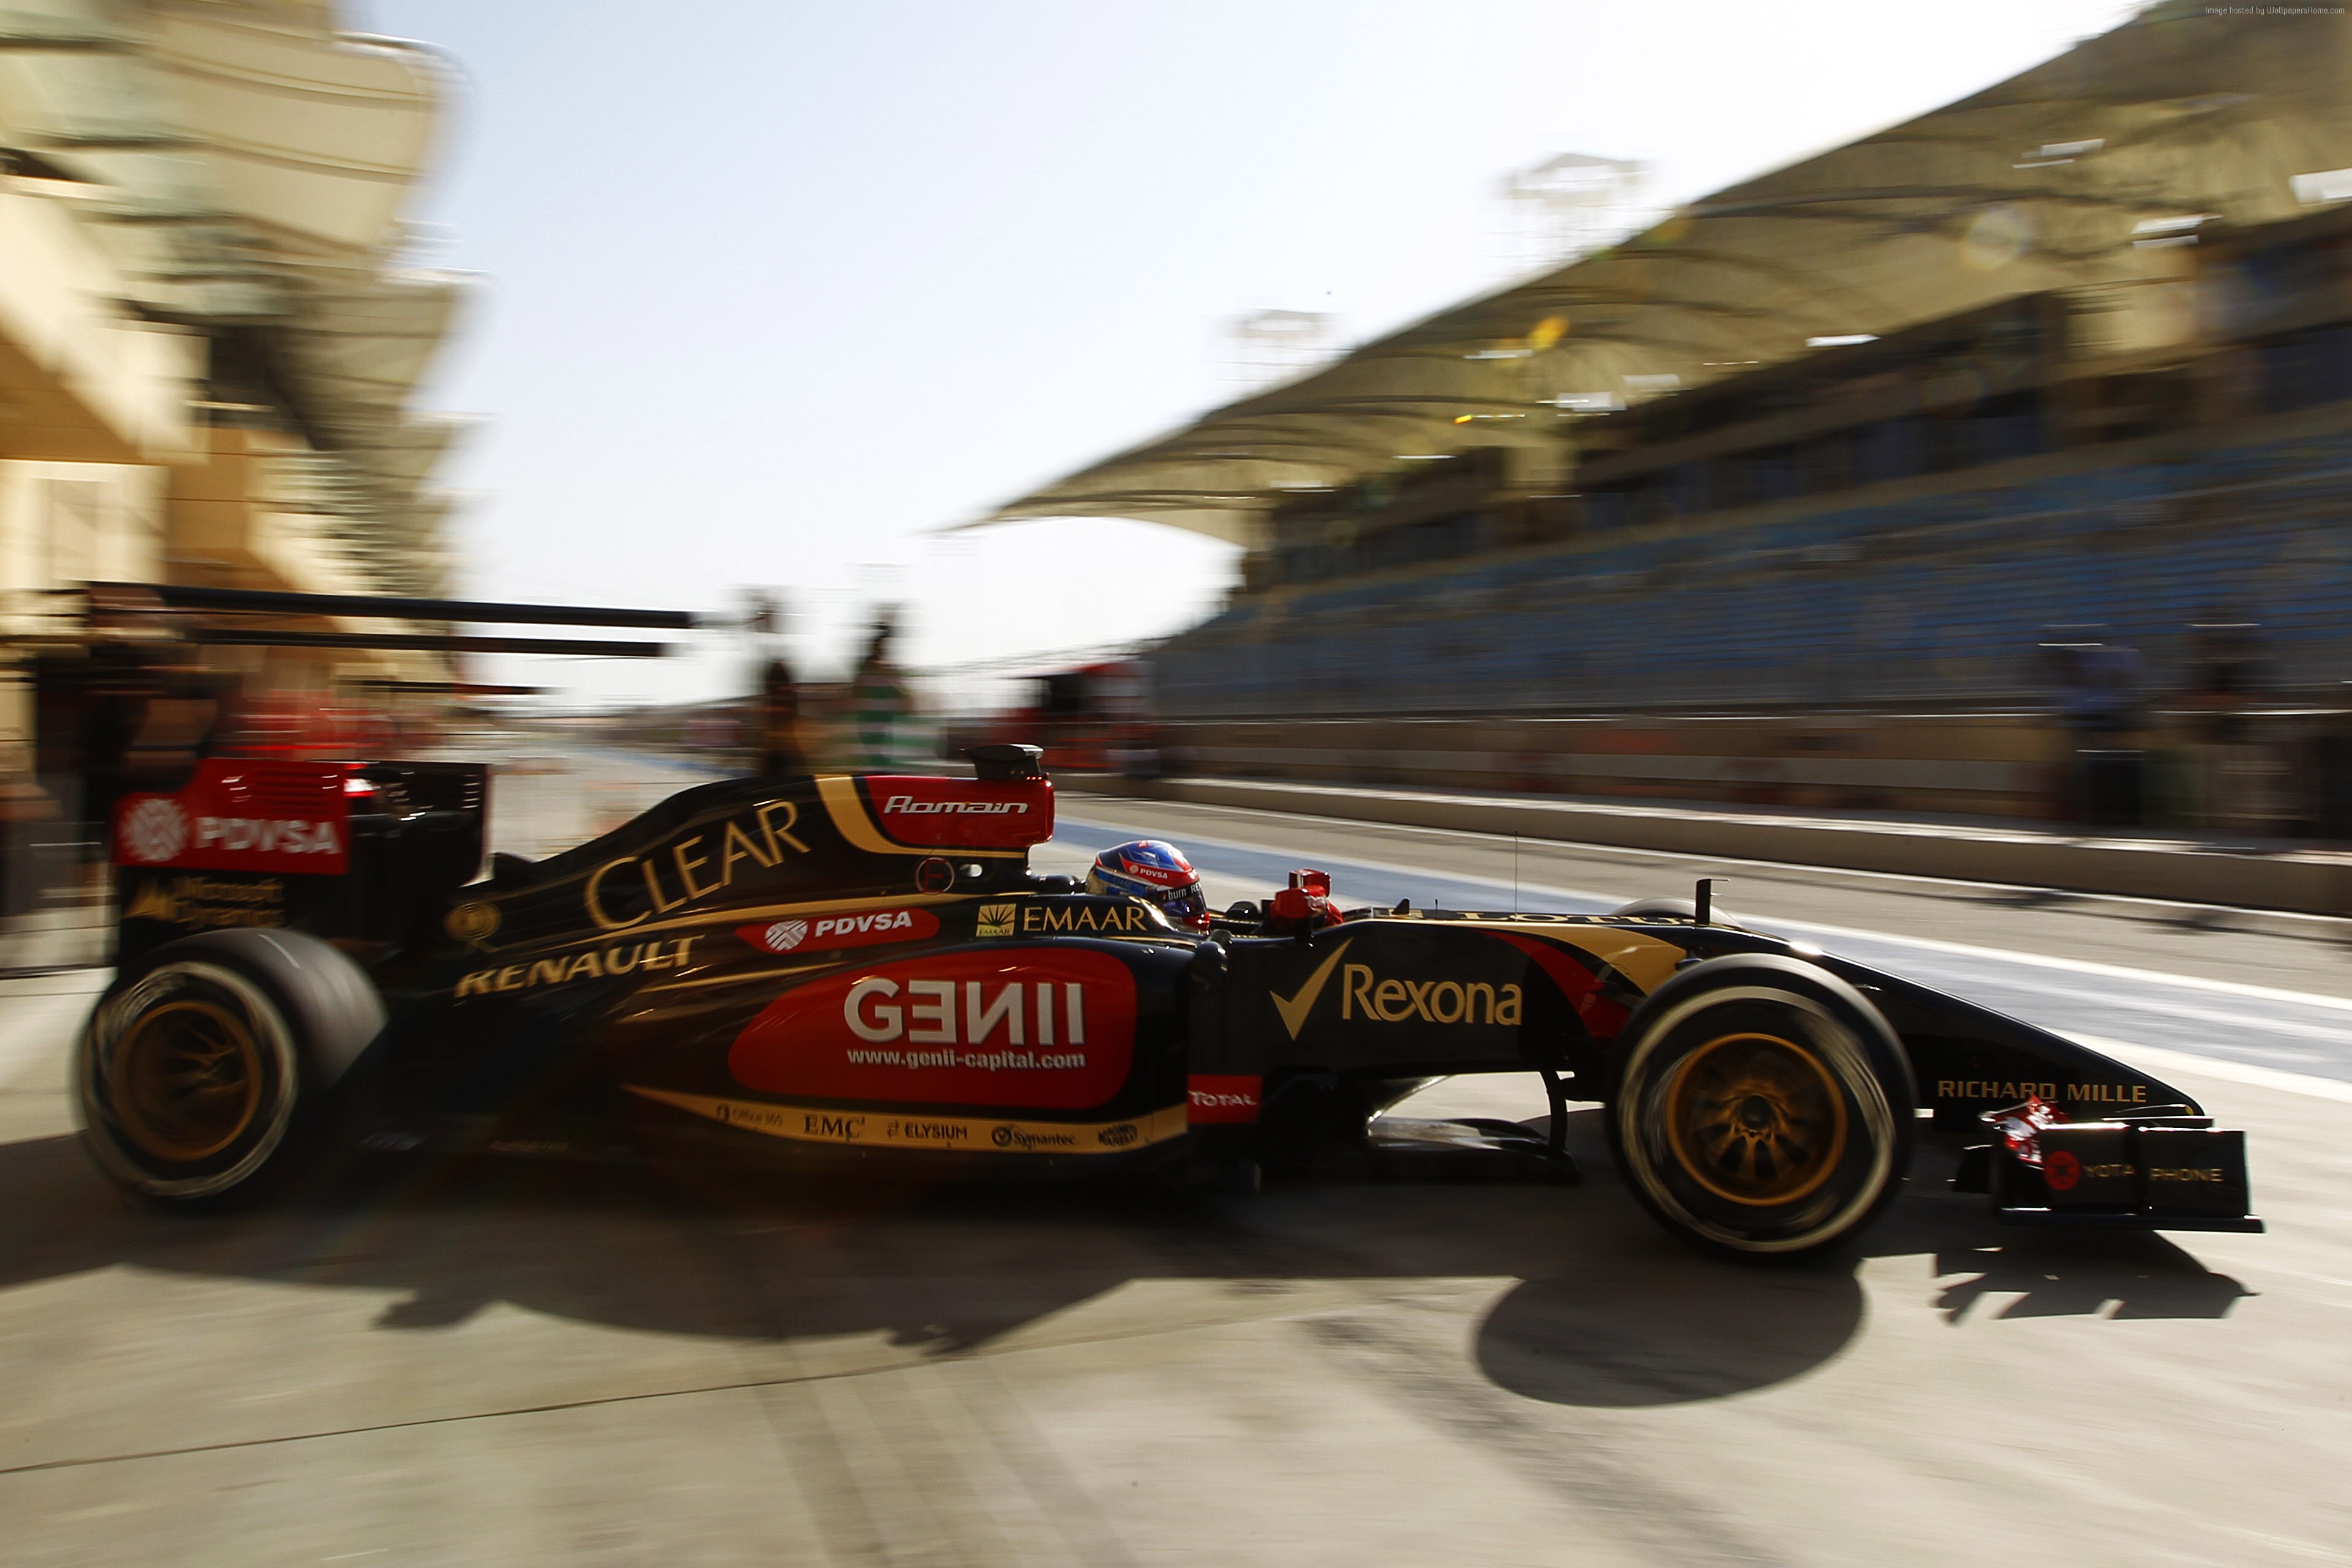 lotus-e22-3844x2563-formula-1-f1-test-drive-2015-review-side-front-2977.jpg